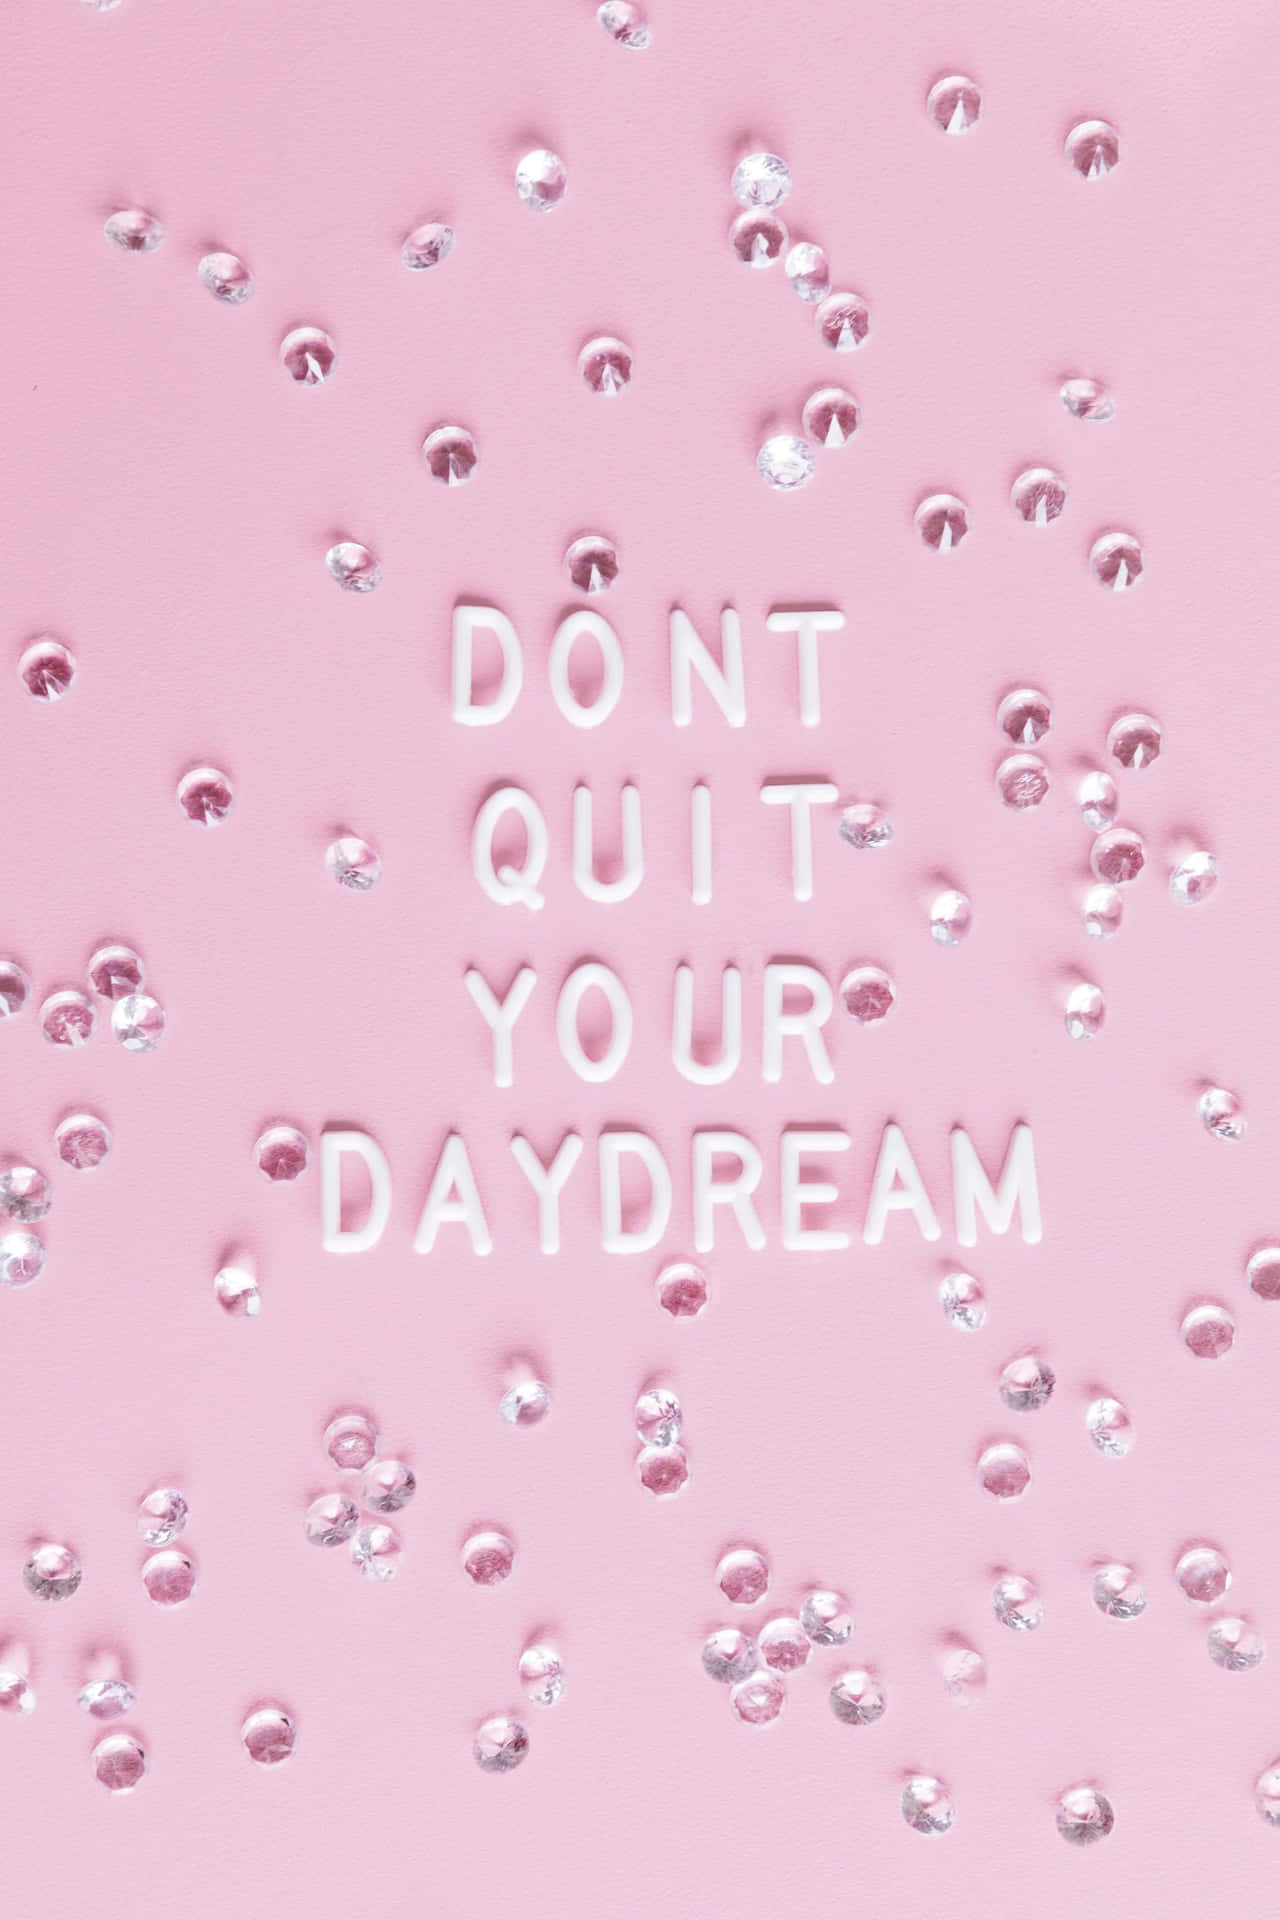 Don't Quit Your Daydream - Sarah Saunders Wallpaper